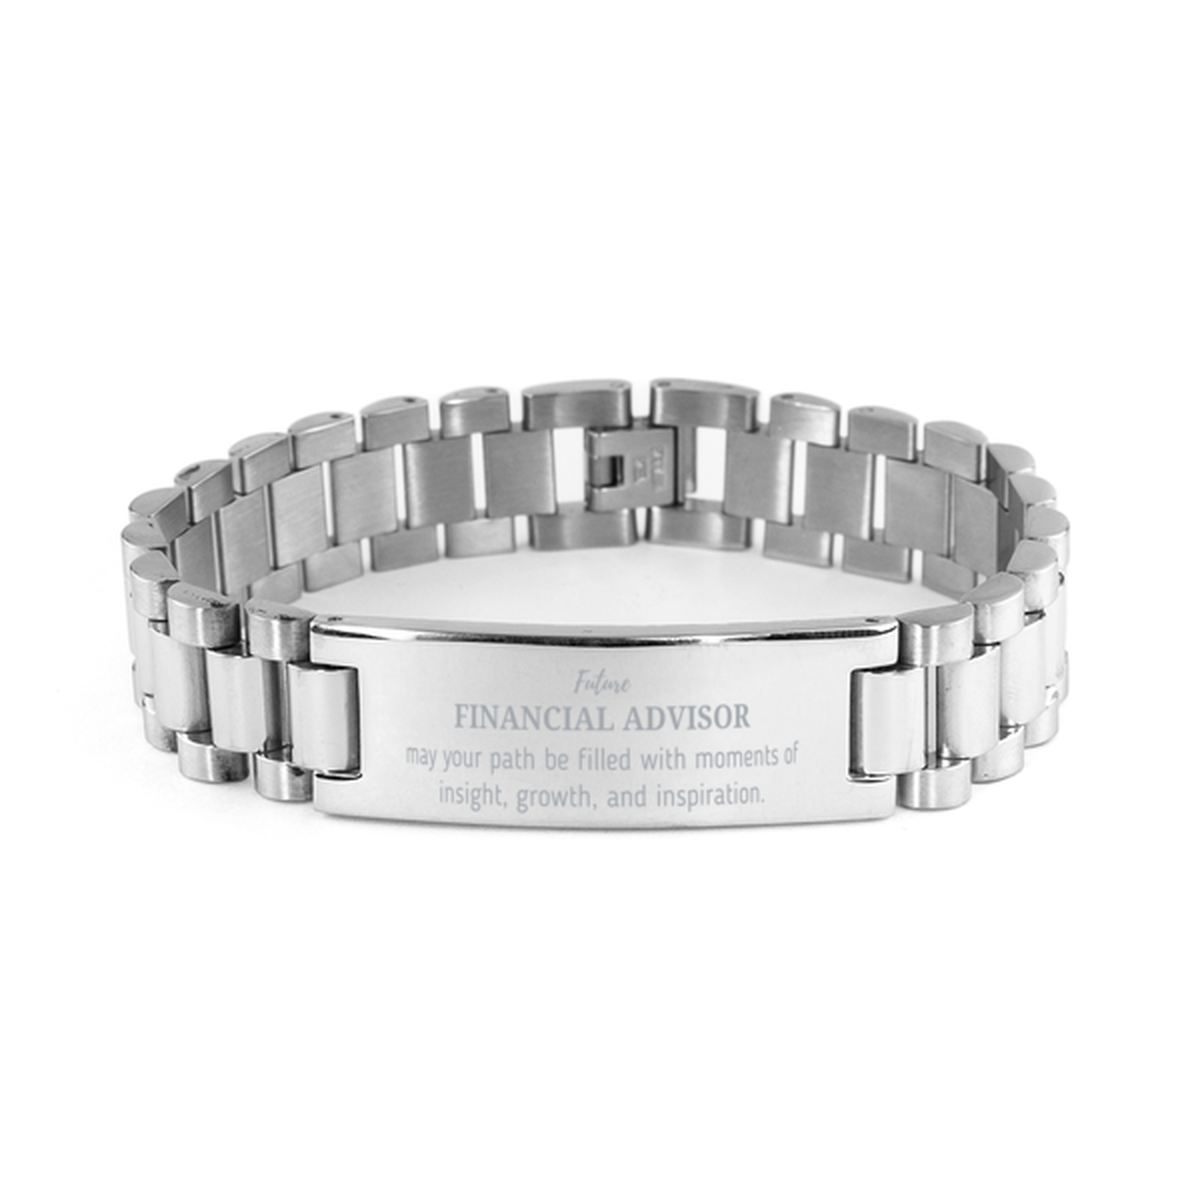 Future Financial Advisor Gifts, May your path be filled with moments of insight, Graduation Gifts for New Financial Advisor, Christmas Unique Ladder Stainless Steel Bracelet For Men, Women, Friends